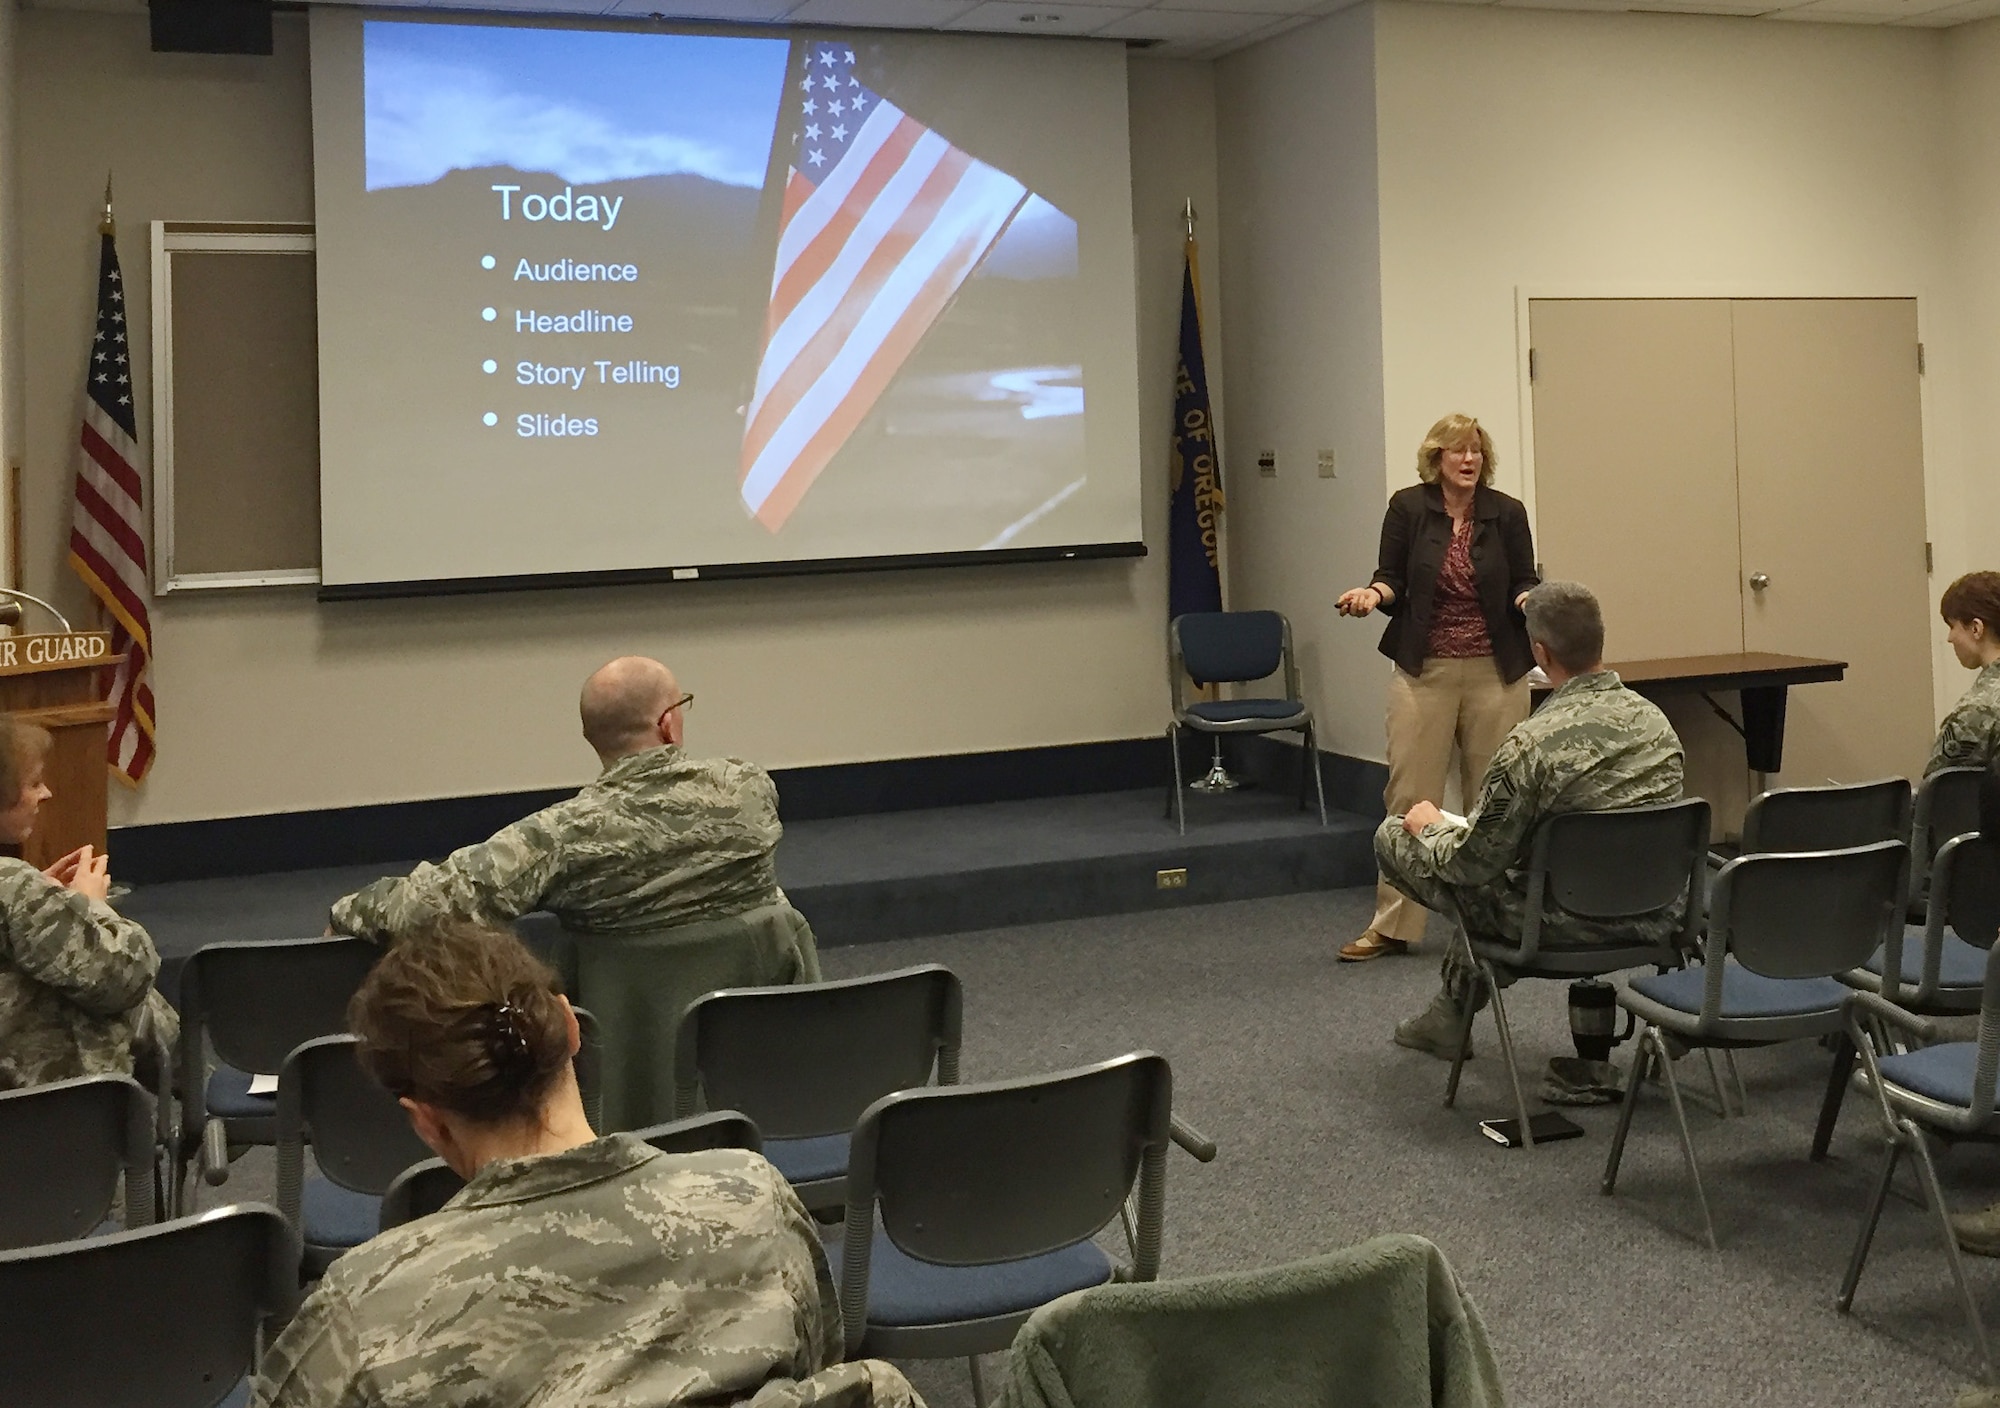 Dr. Rosemary King talks to Airman of the 142nd Fighter Wing during her two-day training on speech writing and delivery techniques held at Portland Air National Guard Base, Ore., Dec. 17, 2015.  King’s presentation skills training is the most recent contribution to the Wing’s ongoing mentorship program. (U.S. Air National Guard photo by 1st Lt. Chelsi Spence, 142nd Fighter Wing Public Affairs)